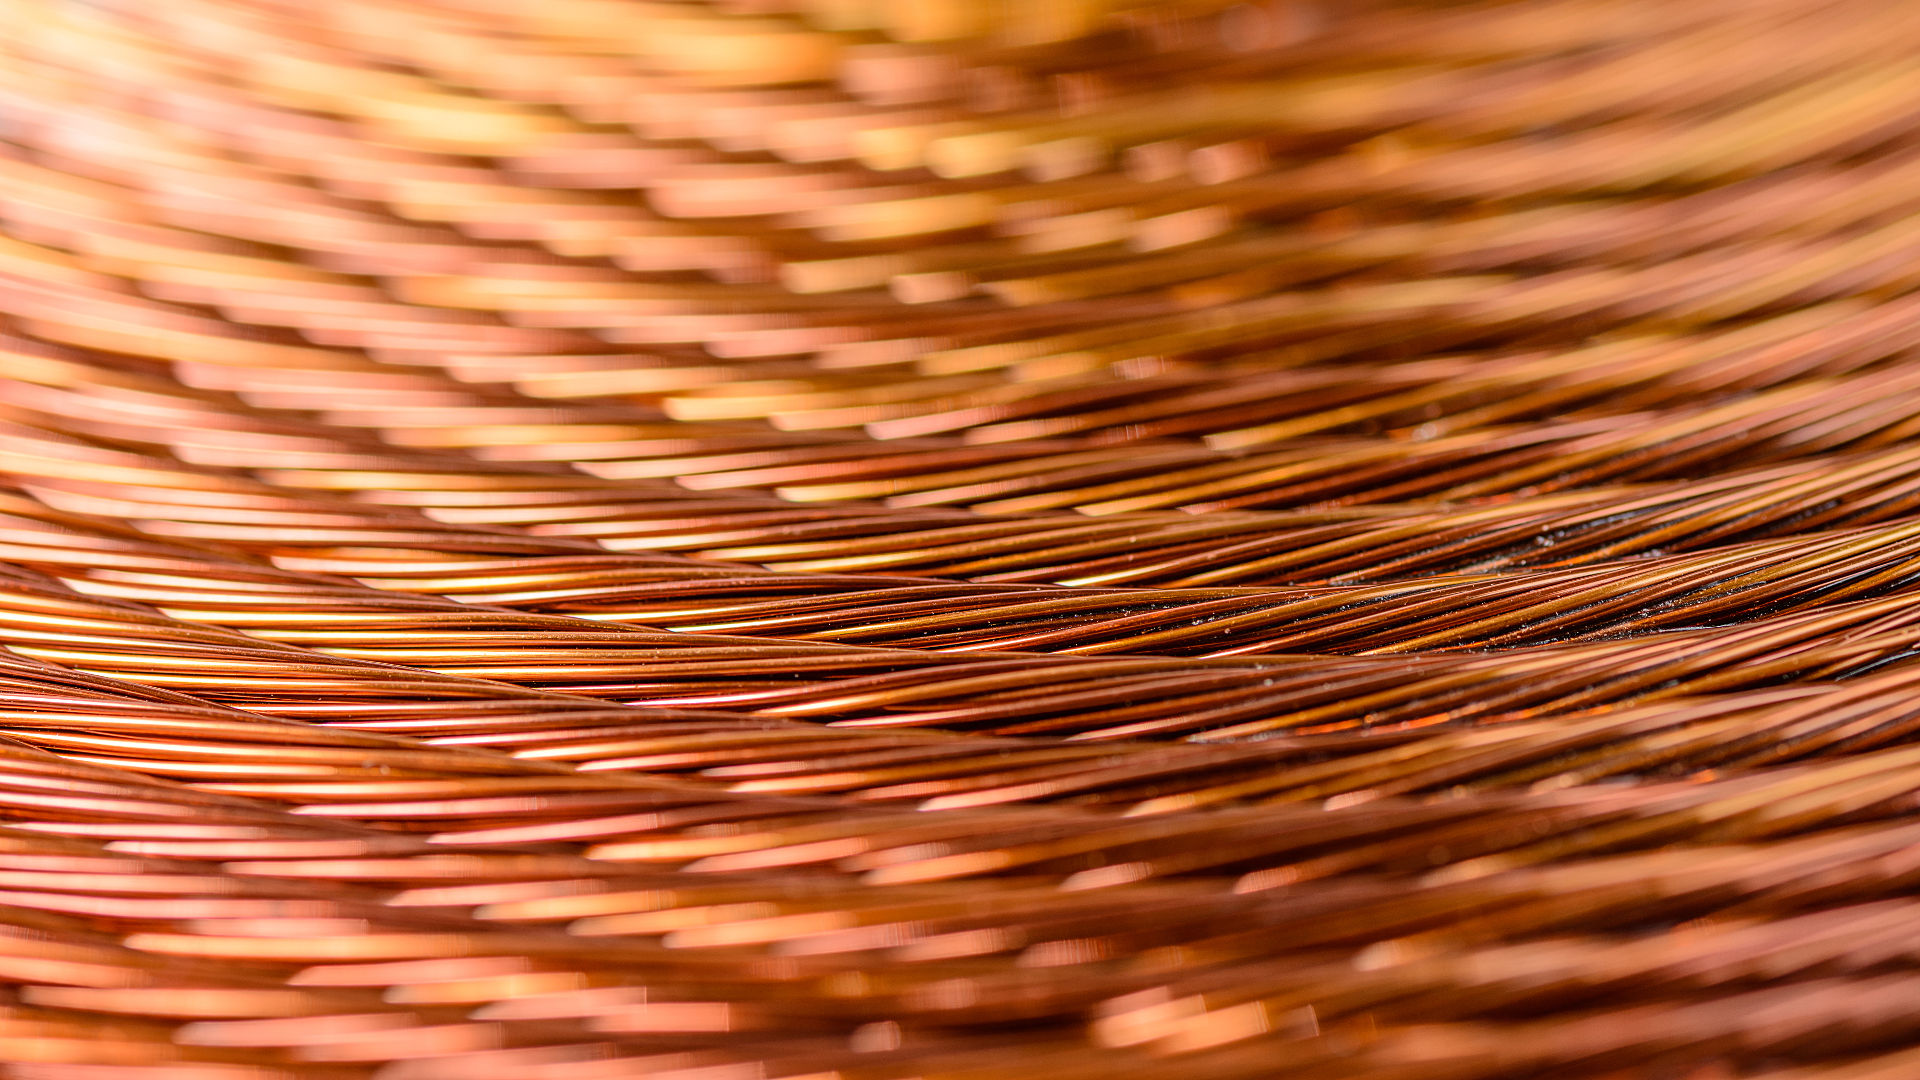 The impact of the US-China trade war on copper production and demand